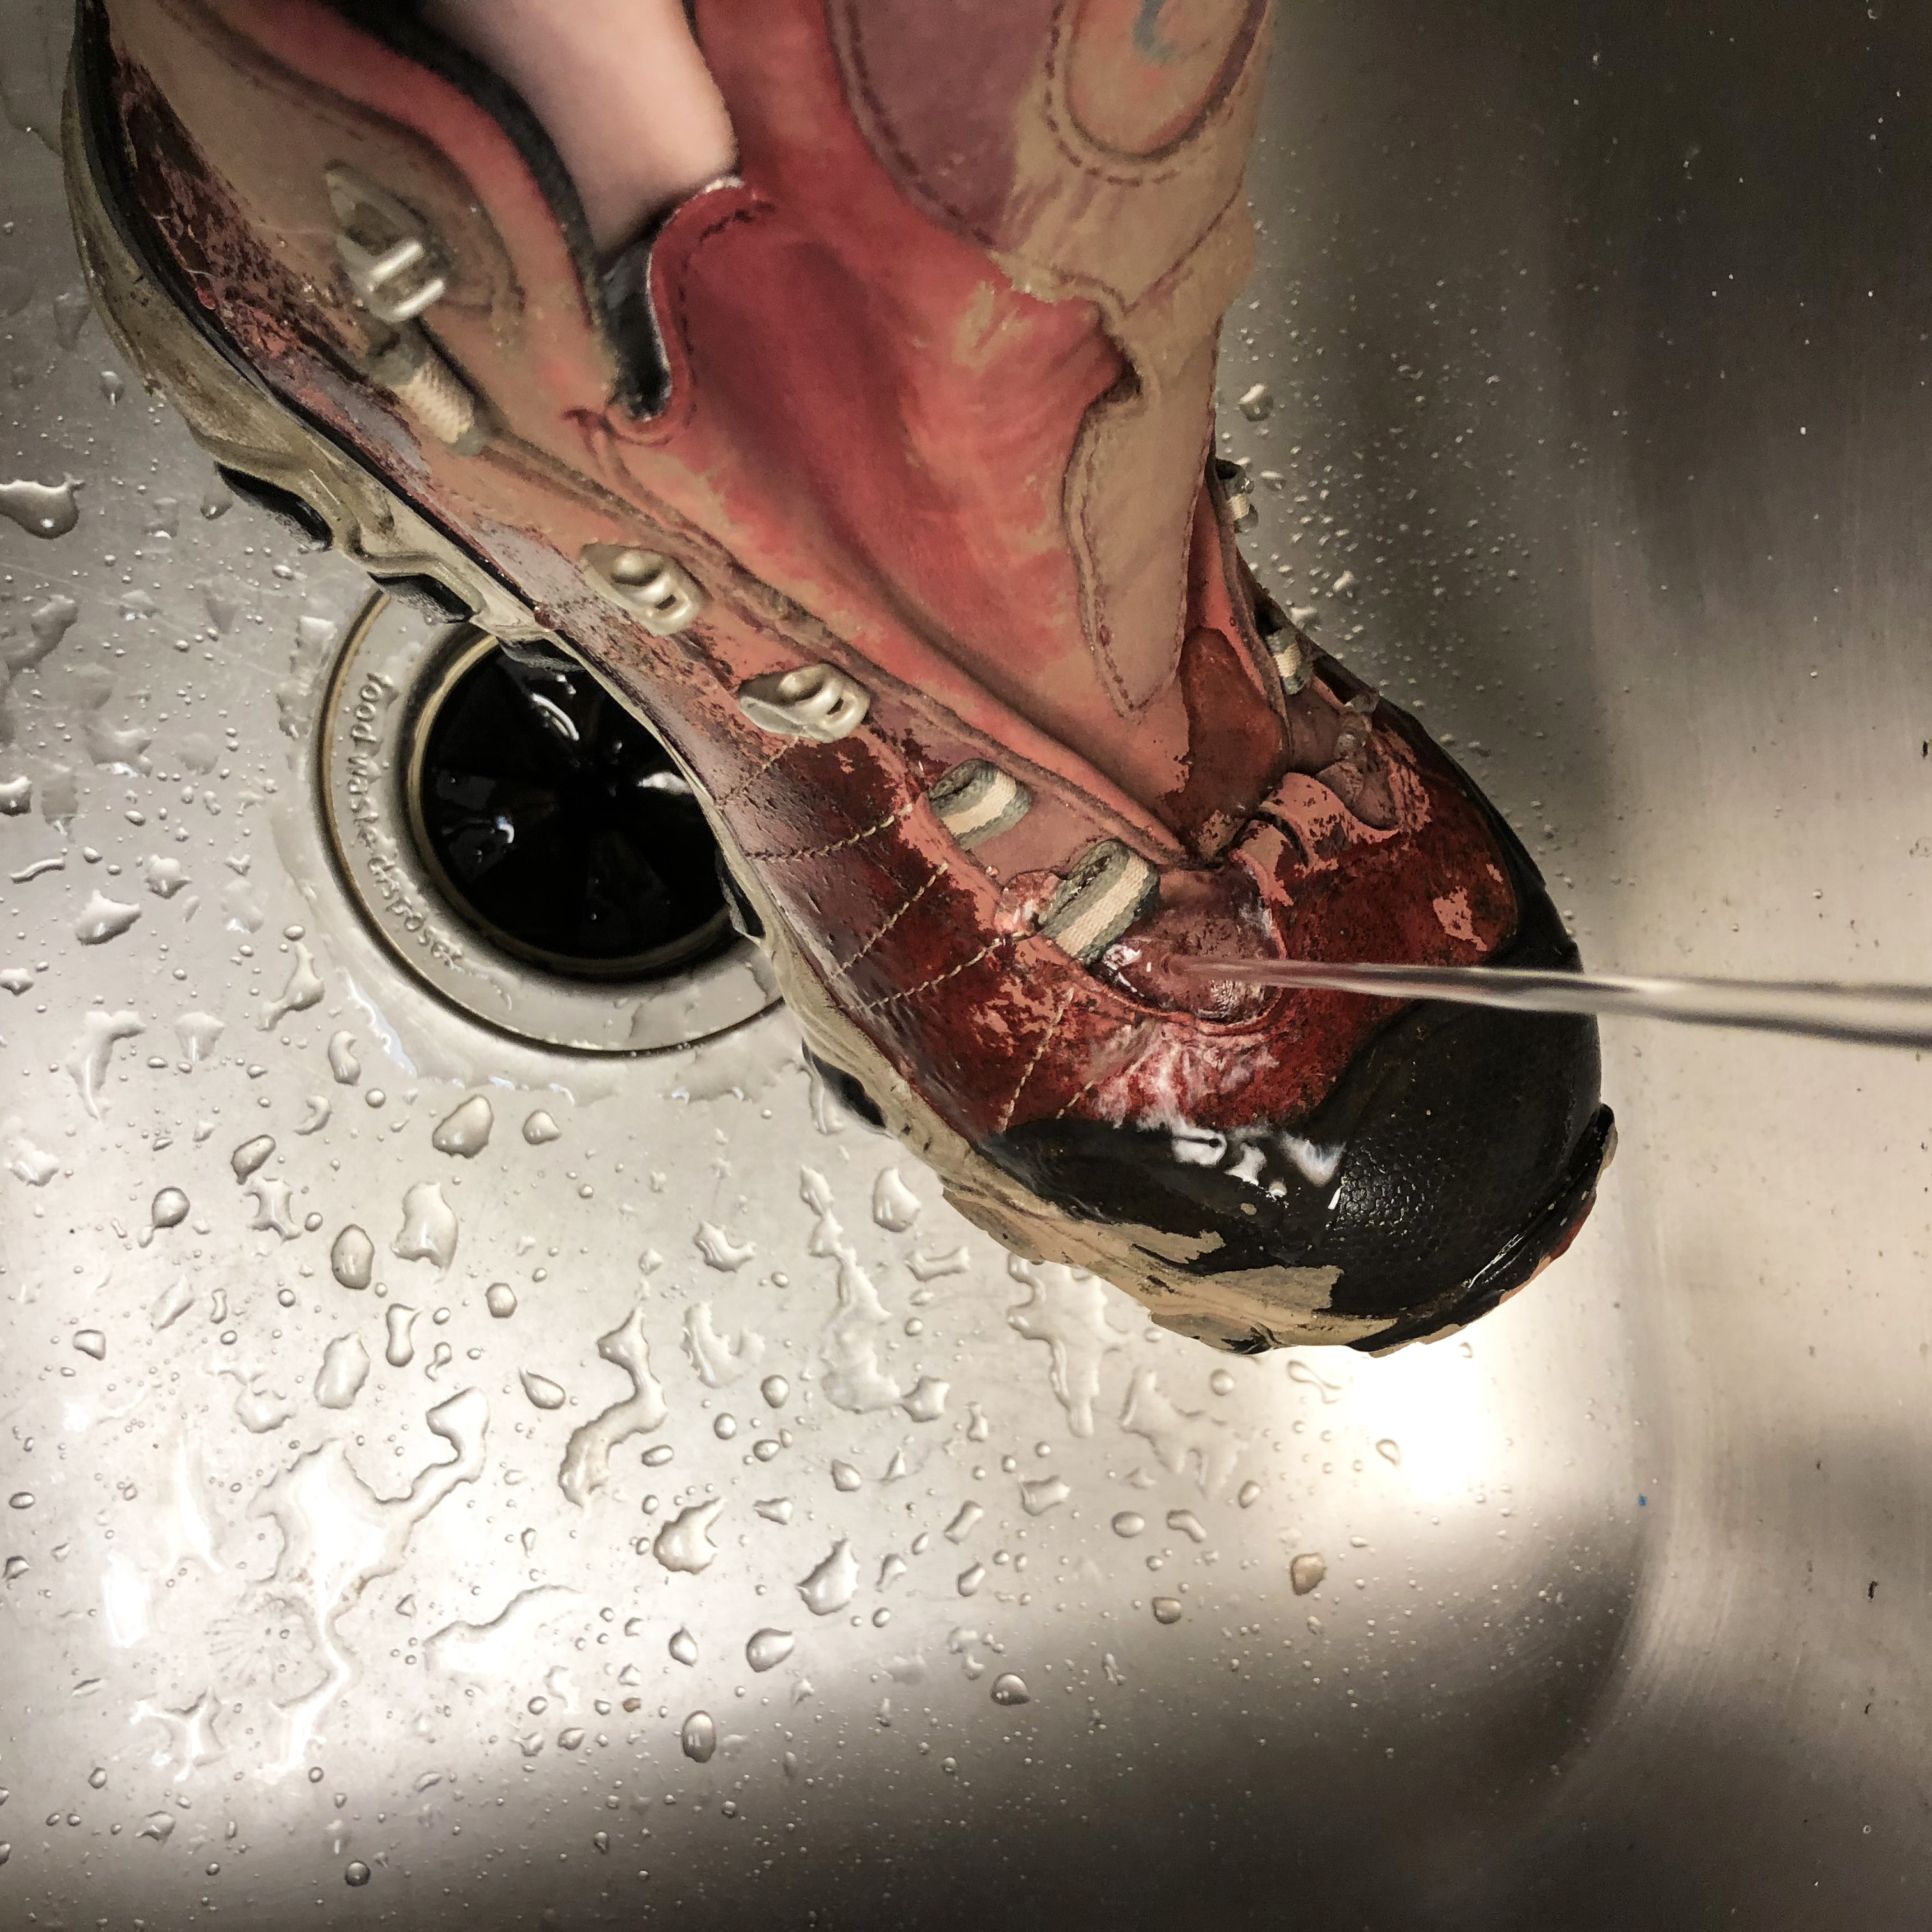 Applying First Principles Thinking To Washing Muddy Boots